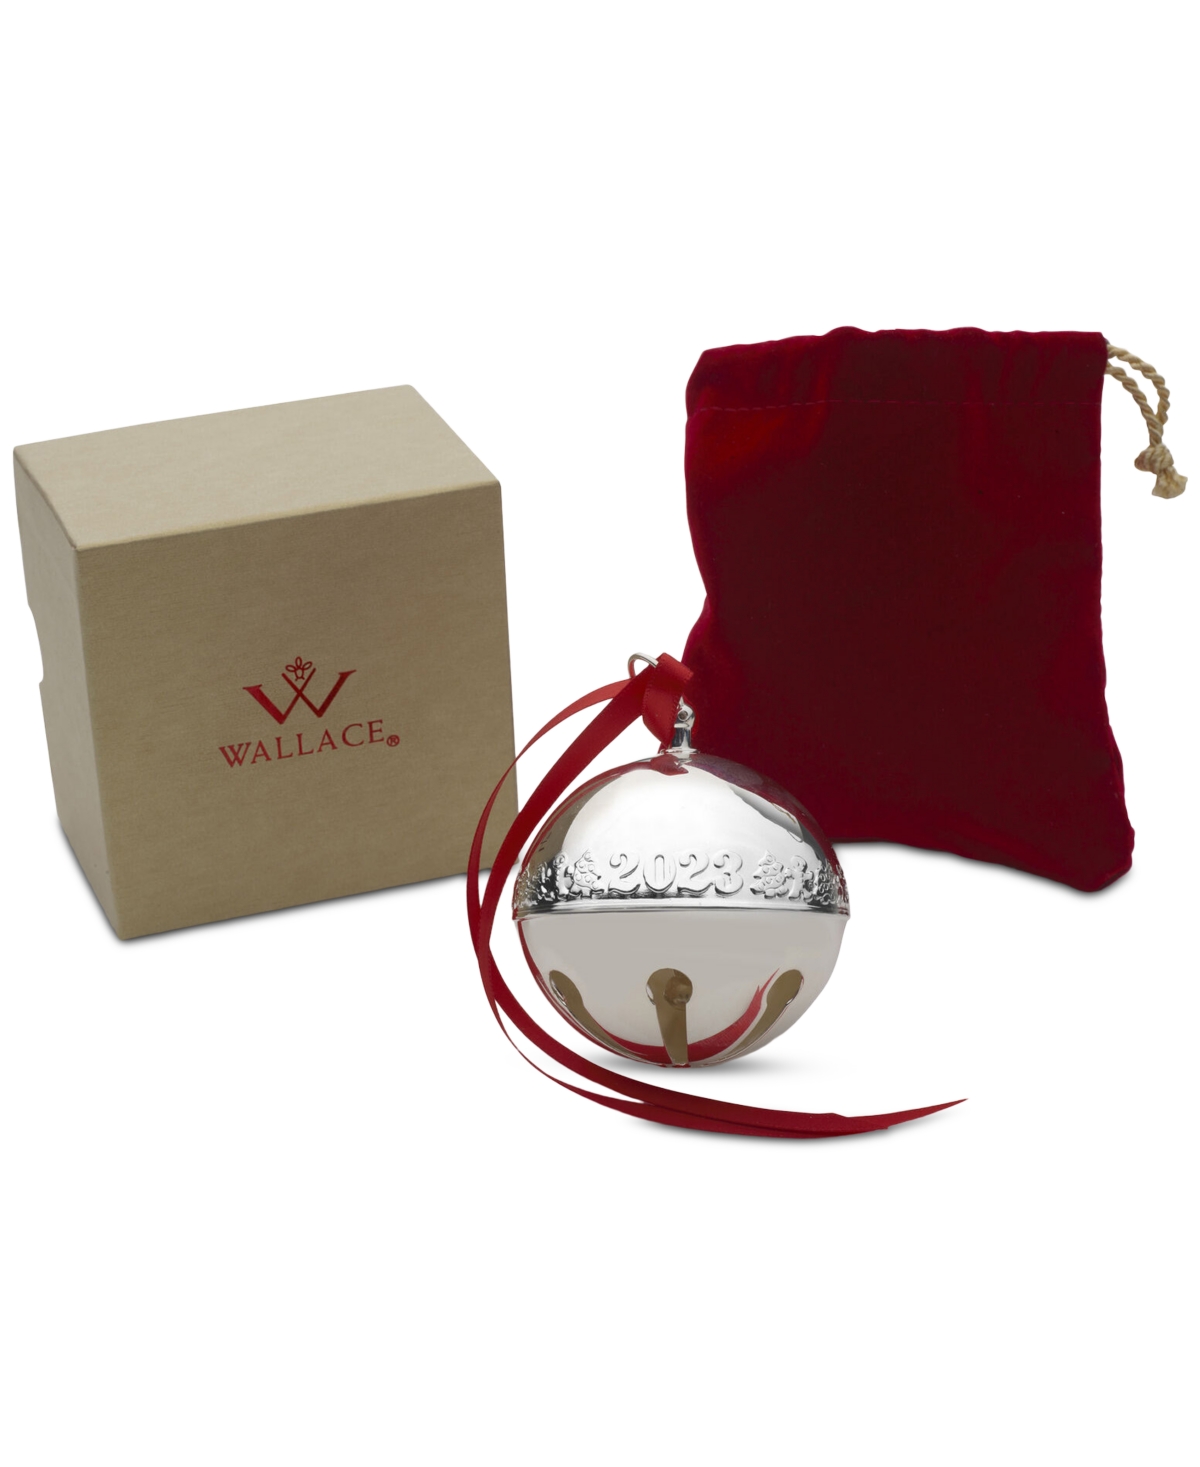 Shop Wallace 2023 Silver-plated Sleigh Bell, 53rd Edition